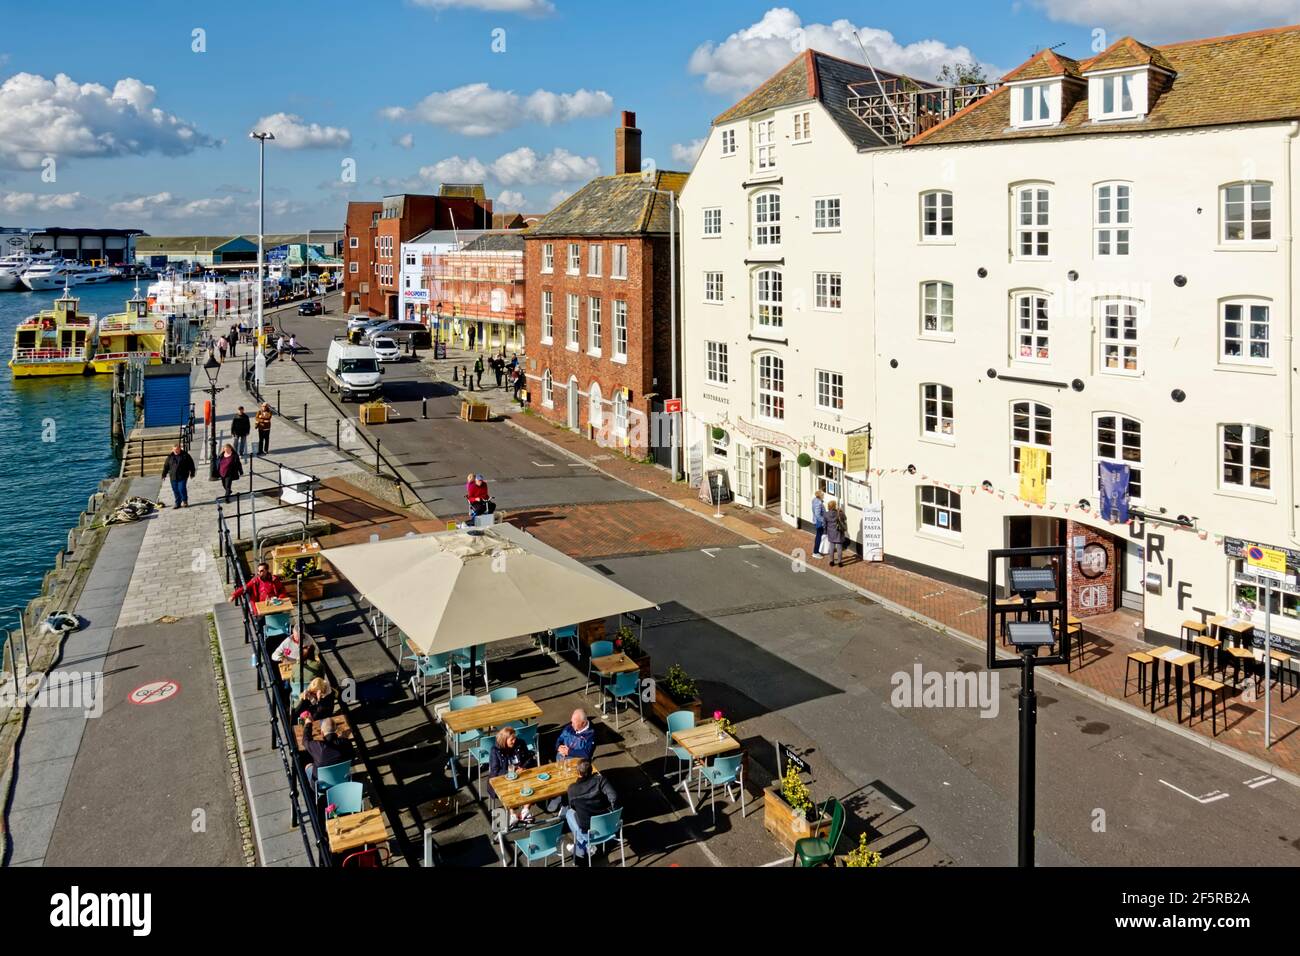 Poole, Dorset / UK - October 14 2020: The Quay at Poole Harbour in Dorset, England, UK Stock Photo